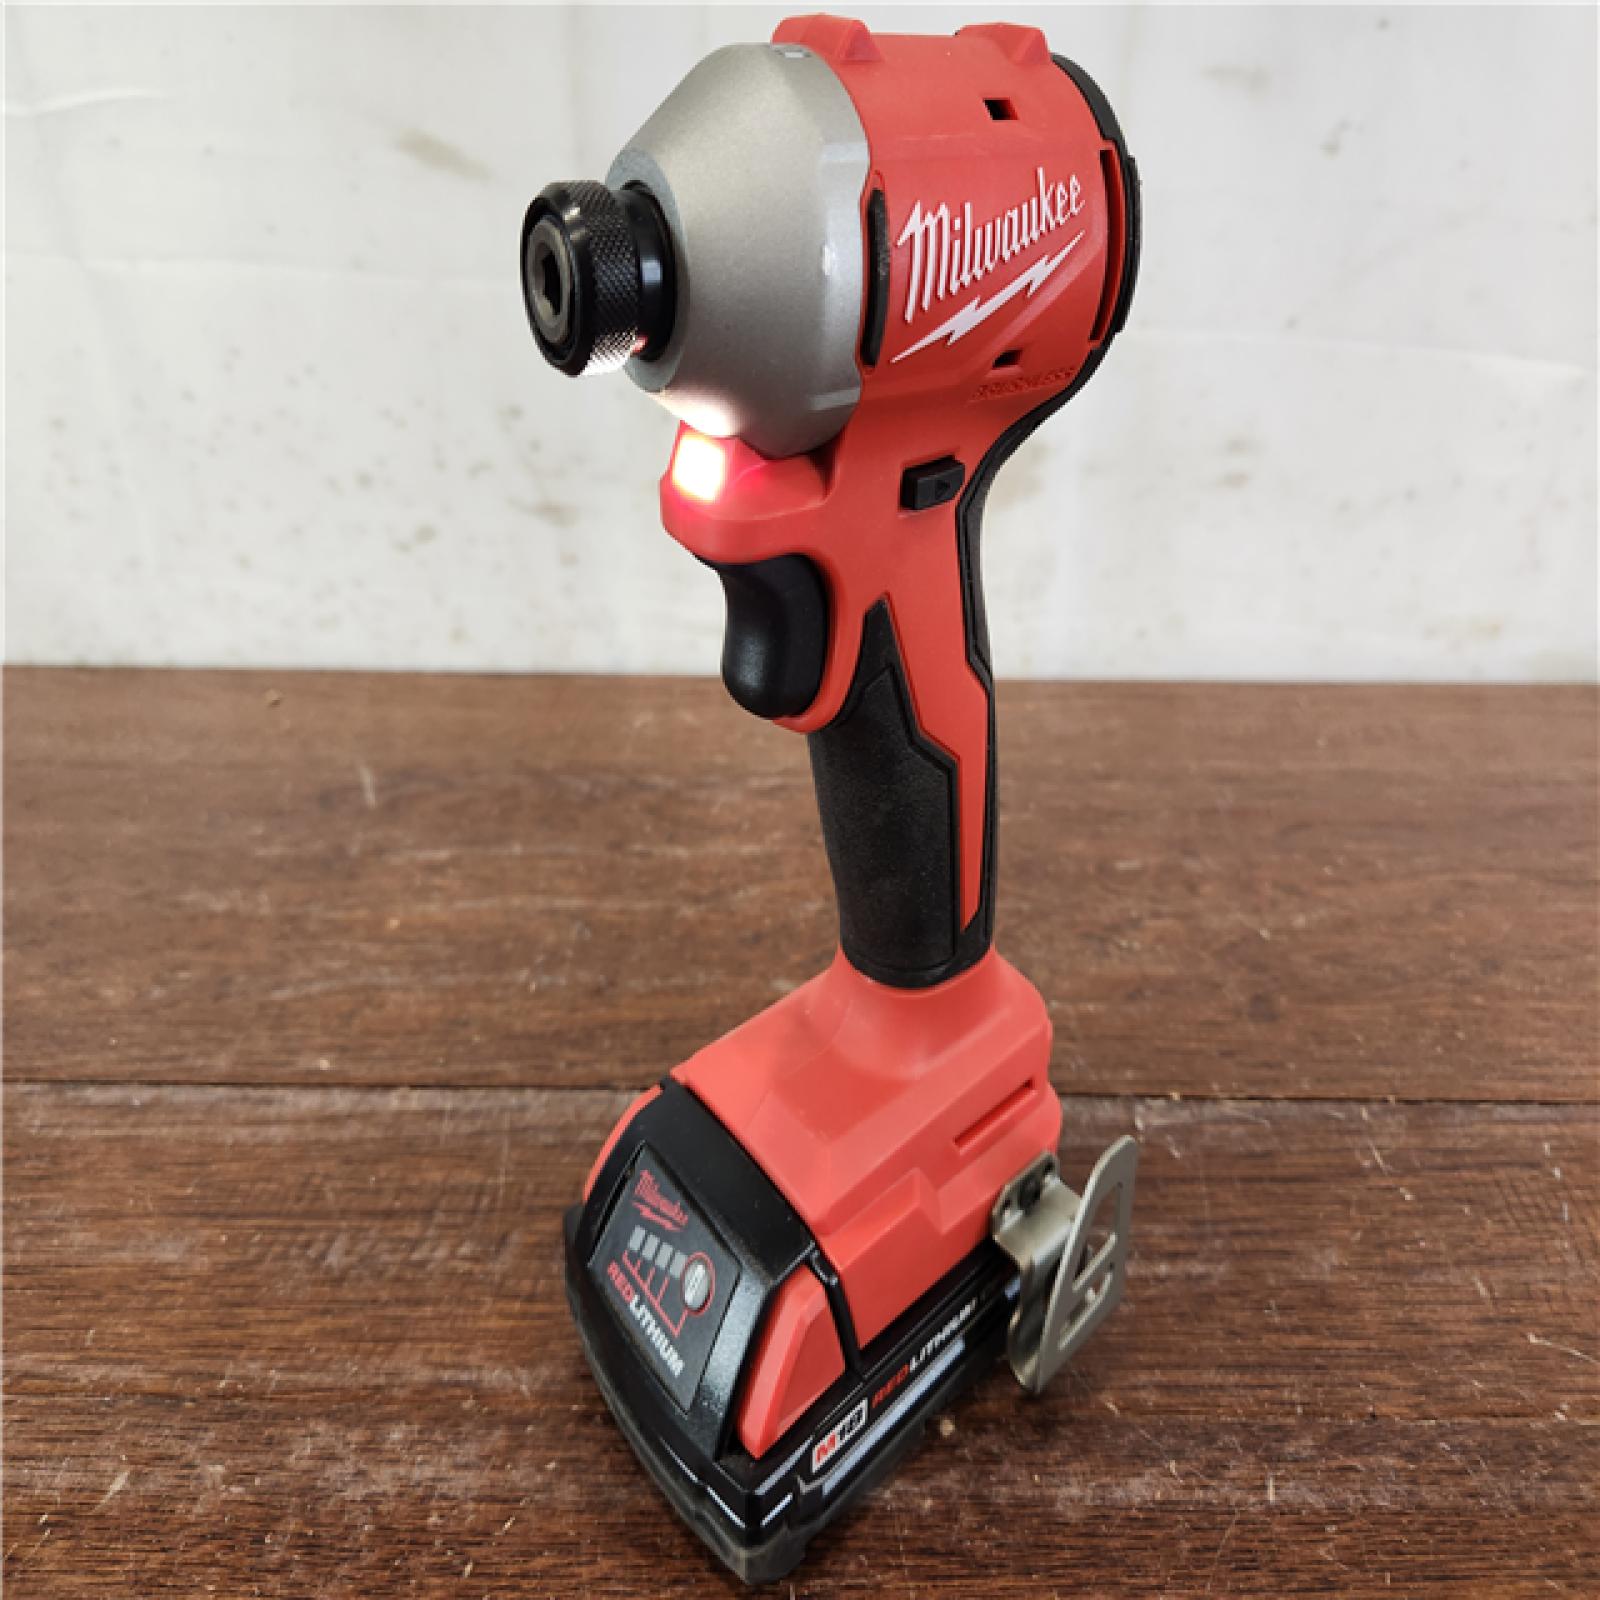 AS-IS Milwaukee M18 Lithium-Ion Brushless Cordless 1/4 in. Impact Driver Kit